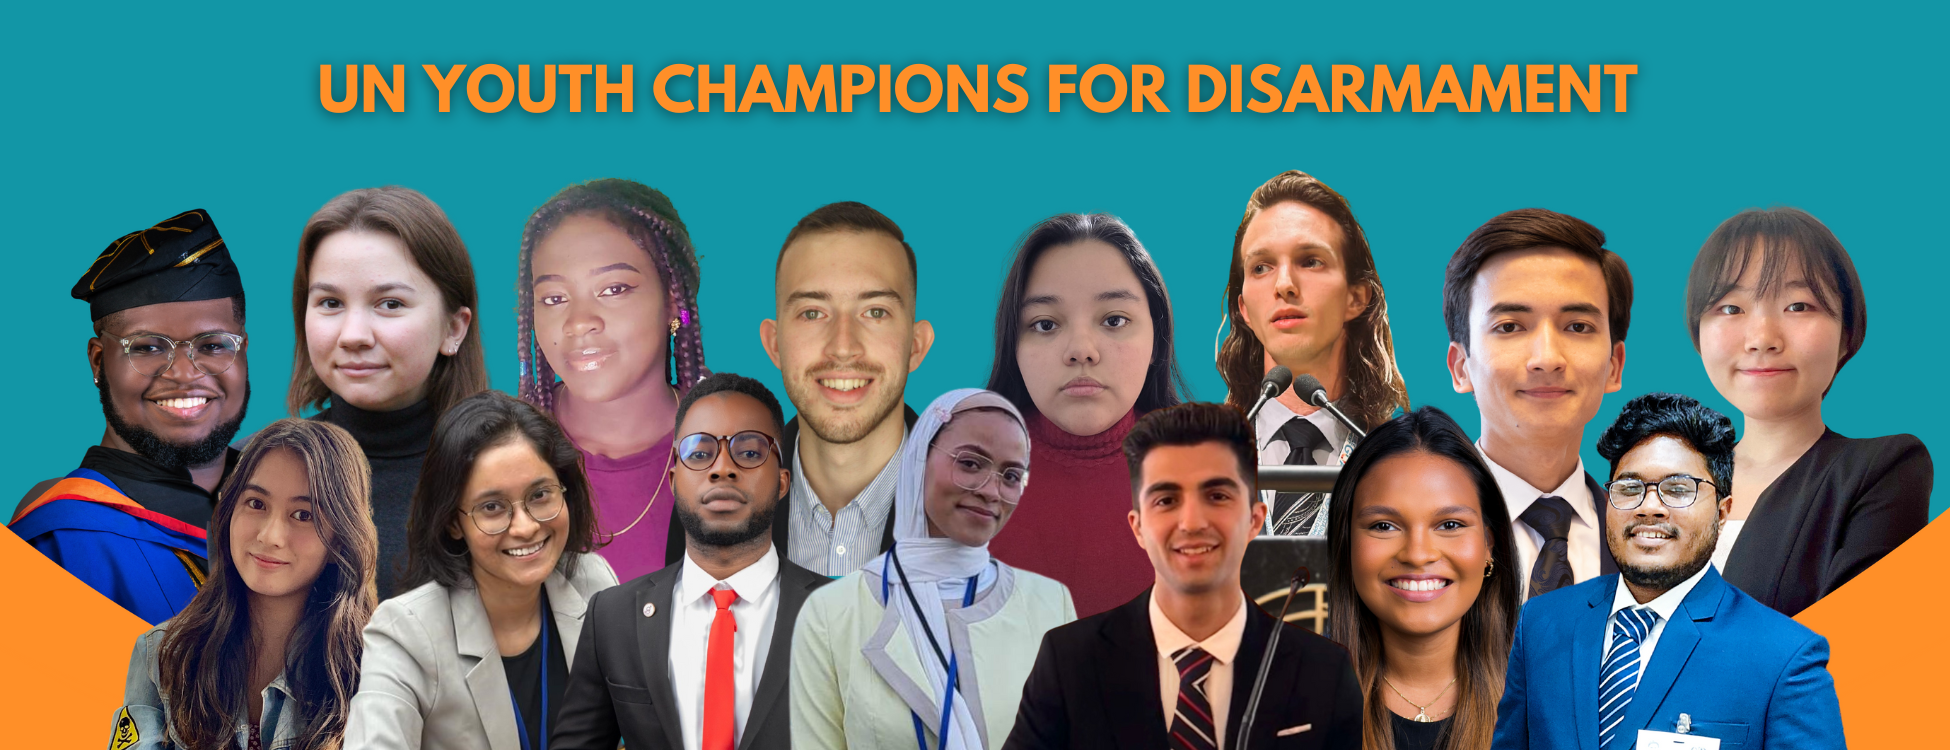 The United Nations Youth Champions for Disarmament